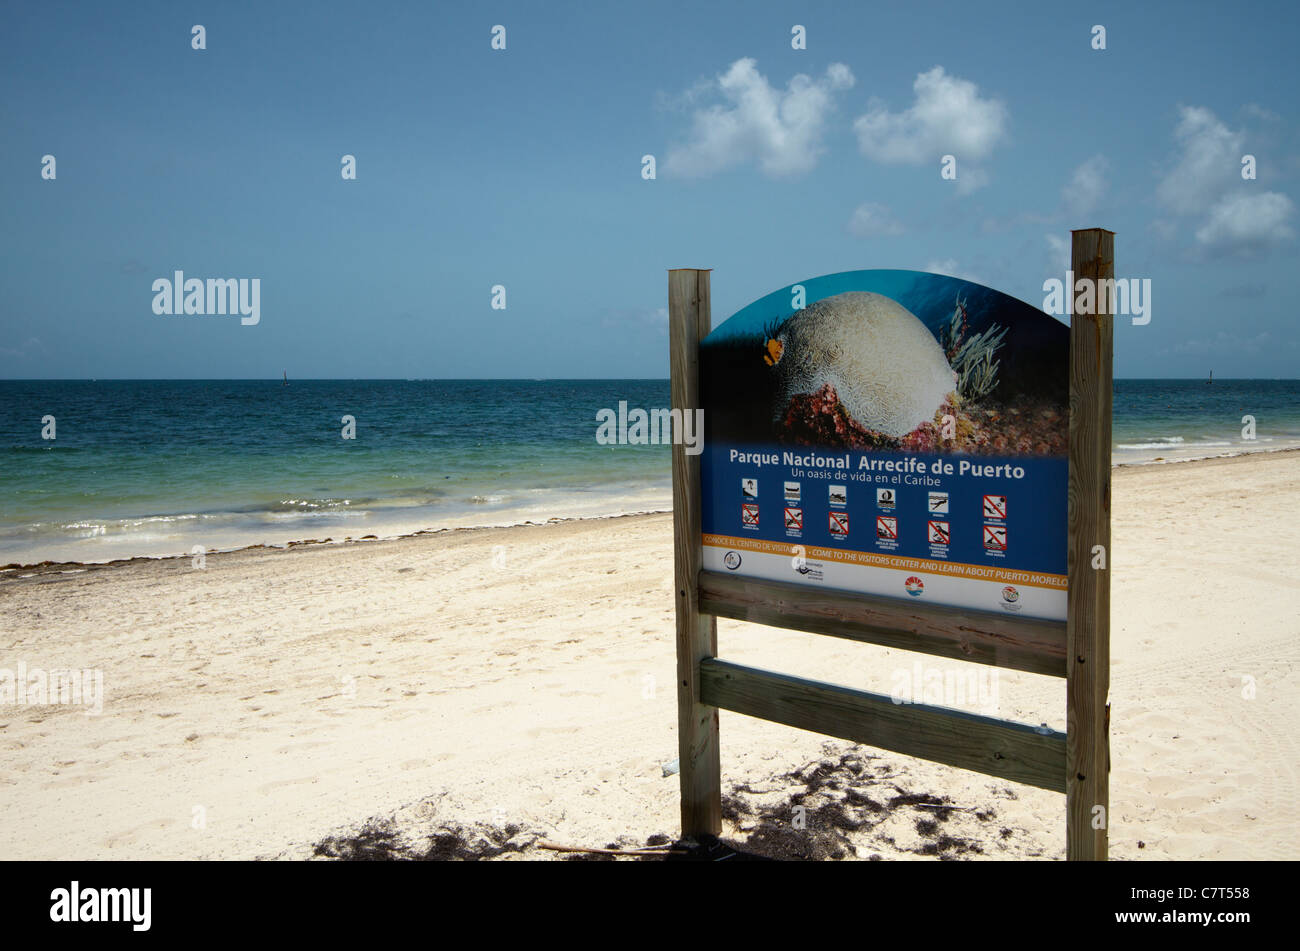 Puerto Morelos Reef National Park  sign Stock Photo